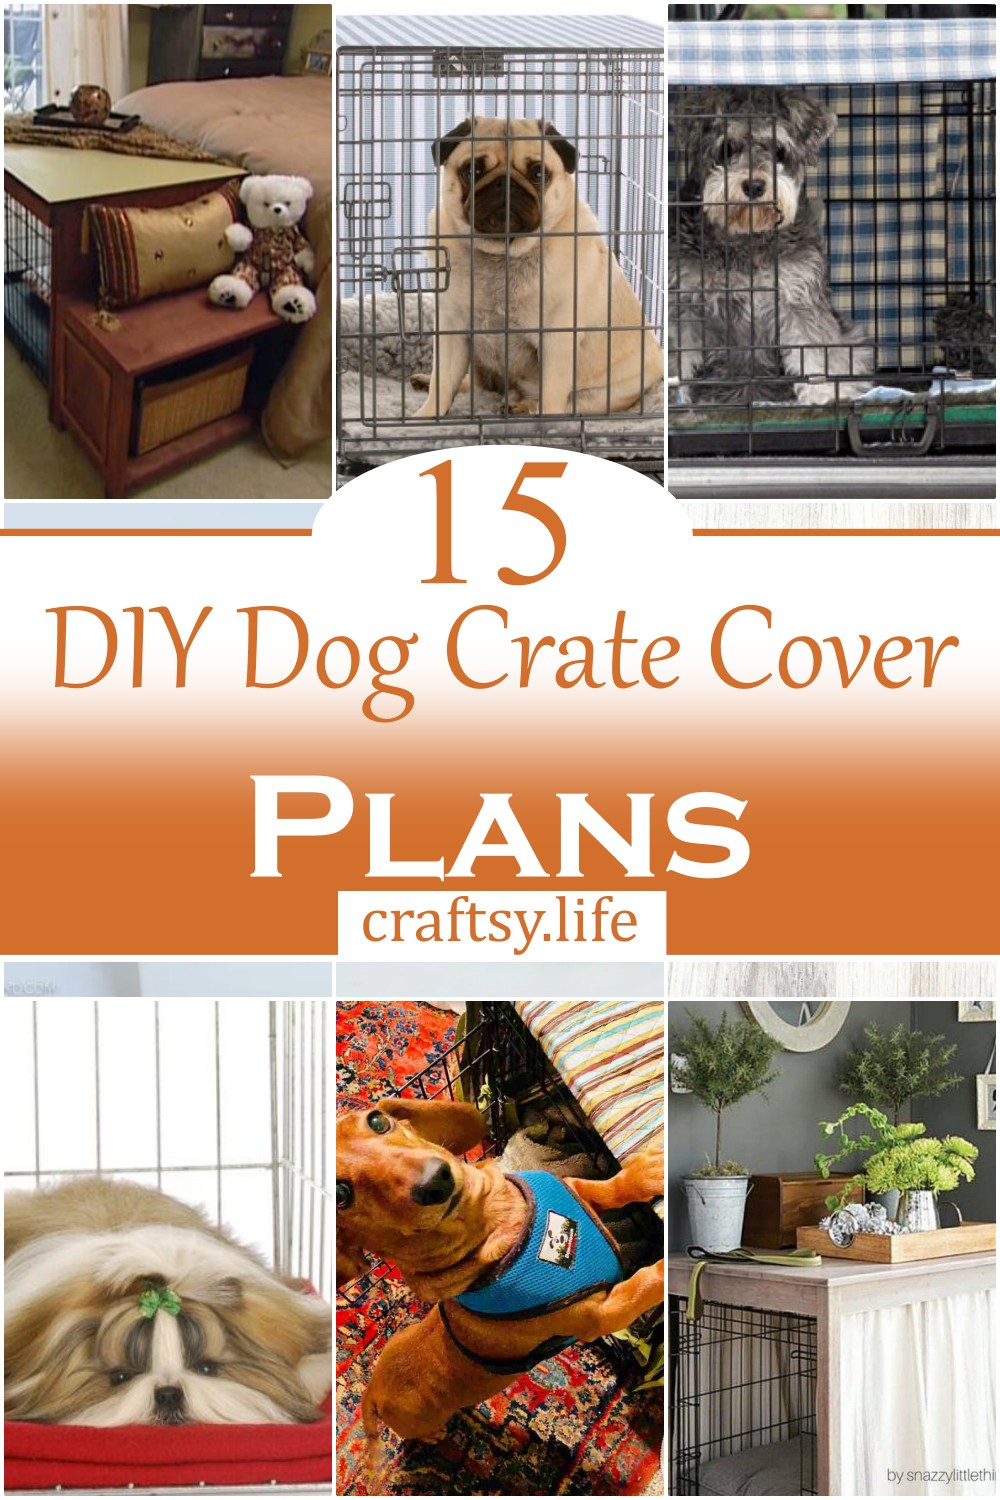 DIY Dog Crate Cover Plans